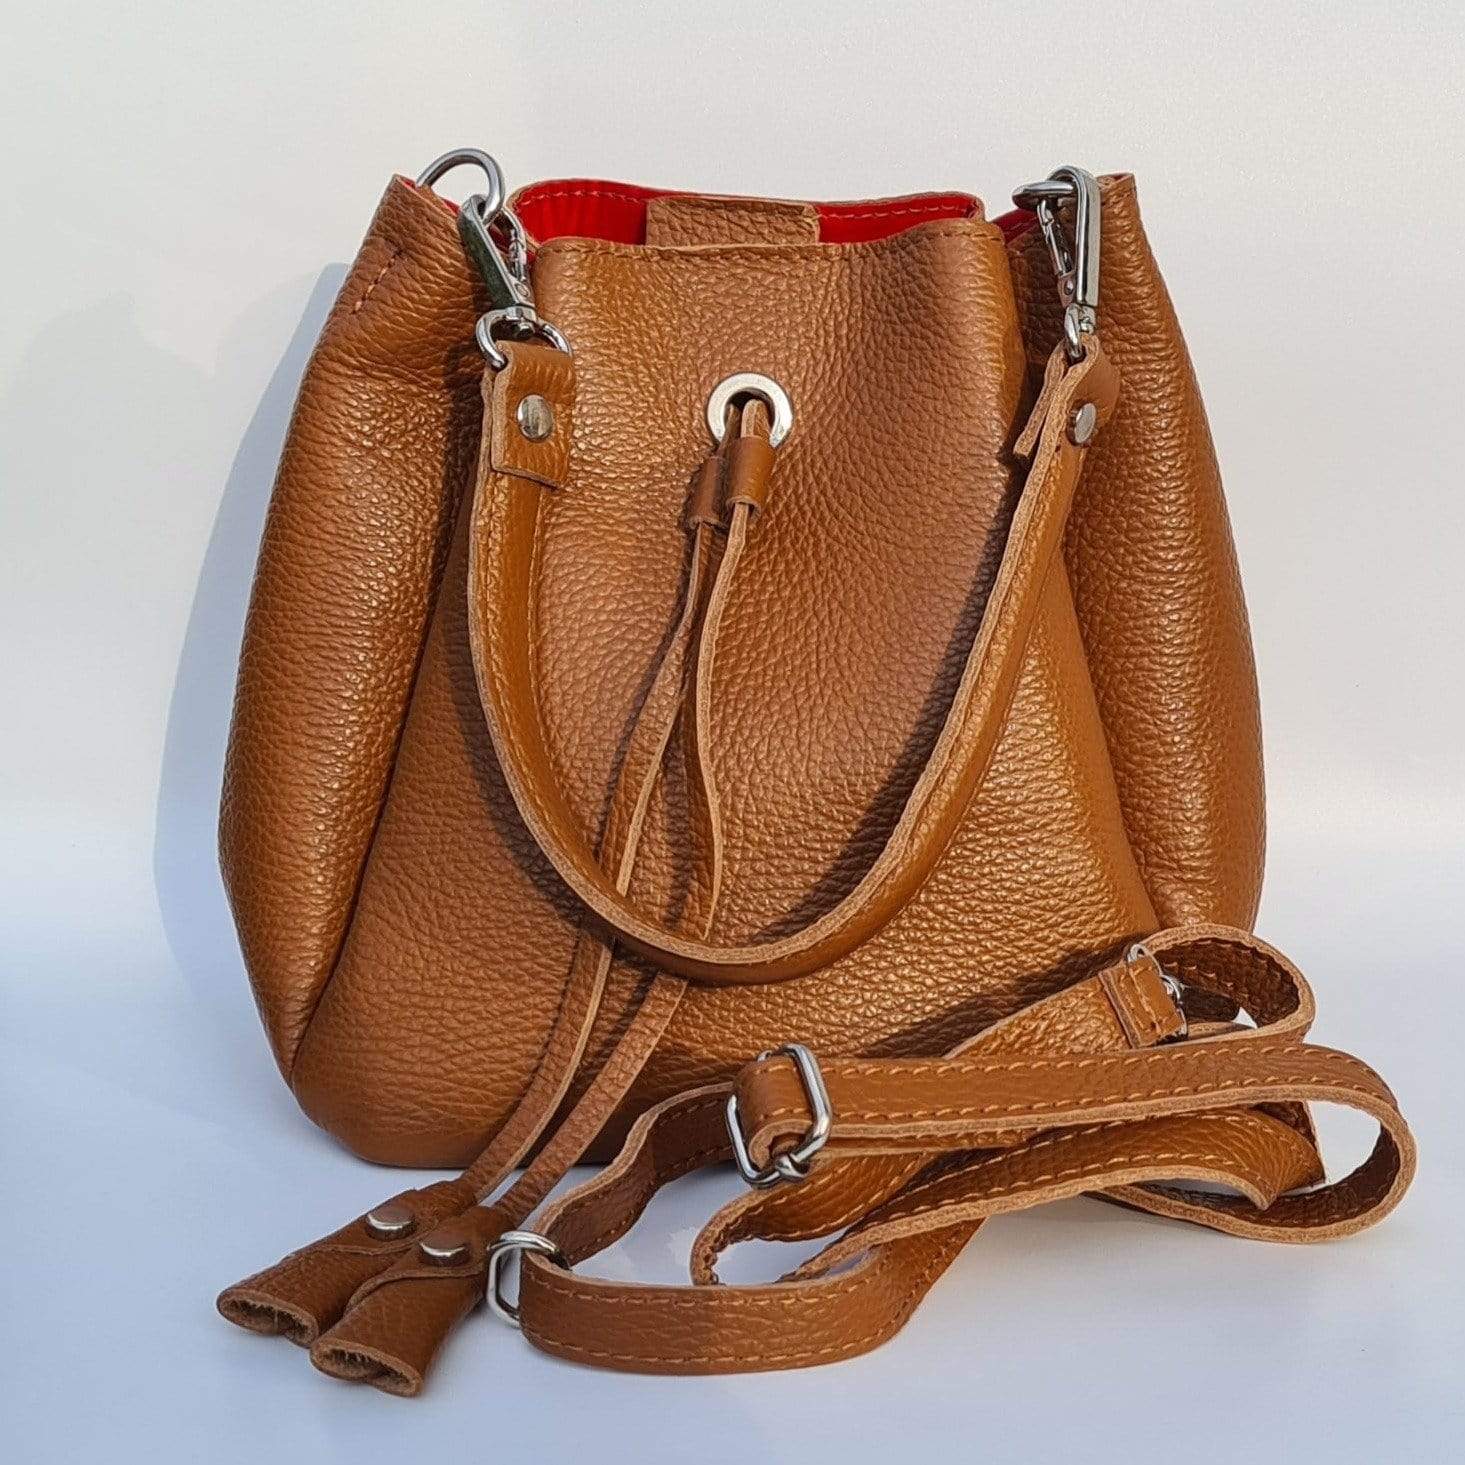 Small bucket bag in tan leather with a handle and a shoulder strap